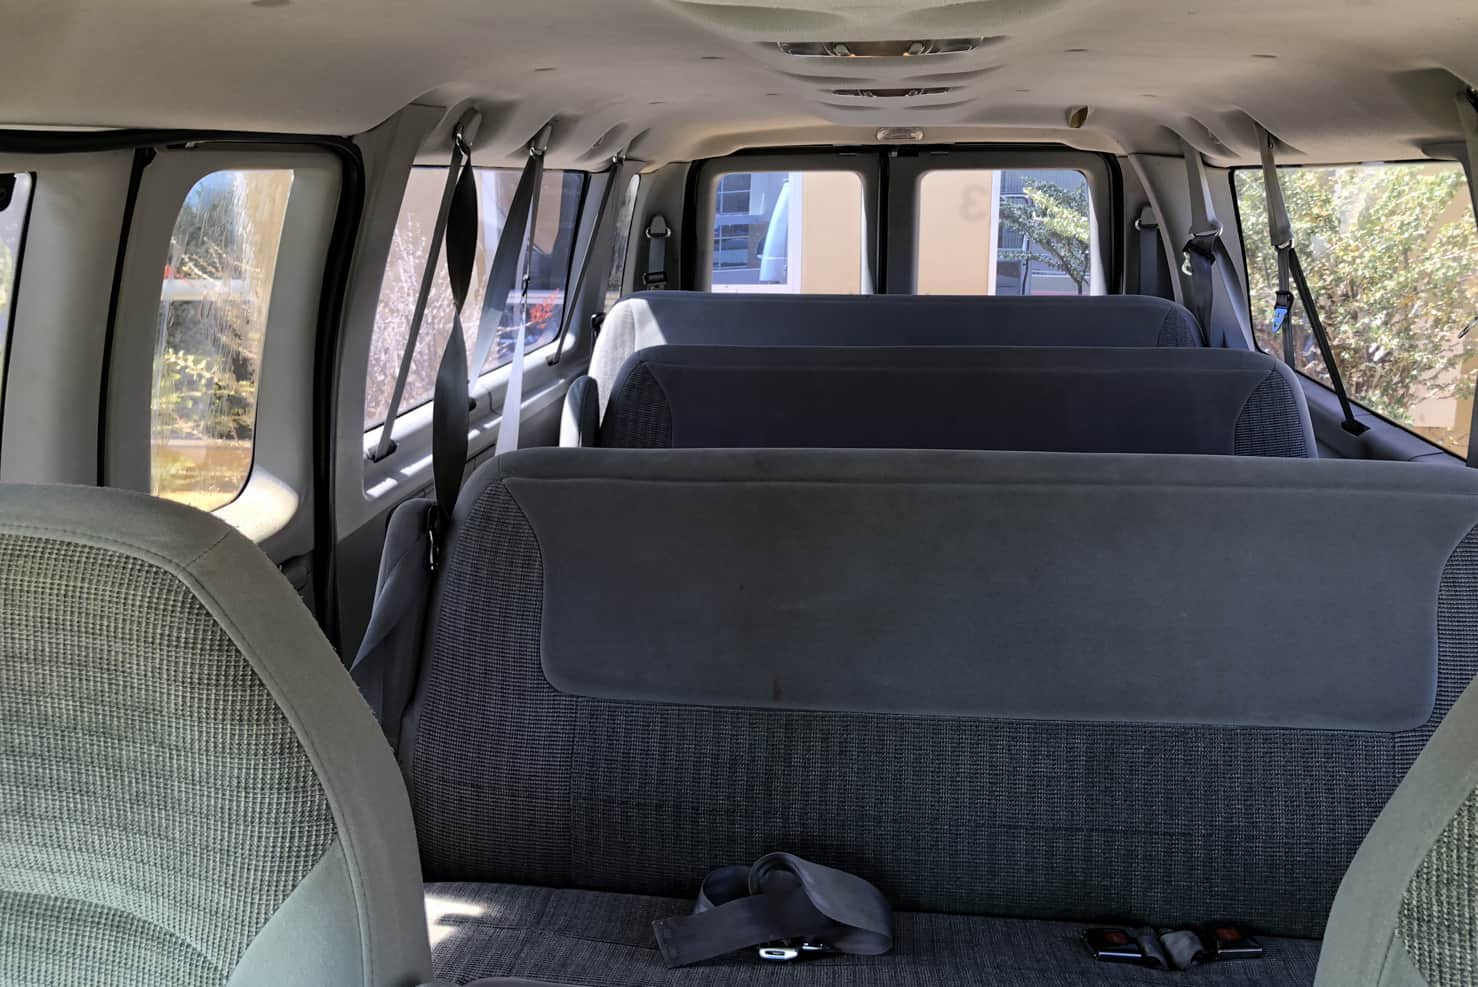 Ford Super Duty Vans 12 to 15 Passengers